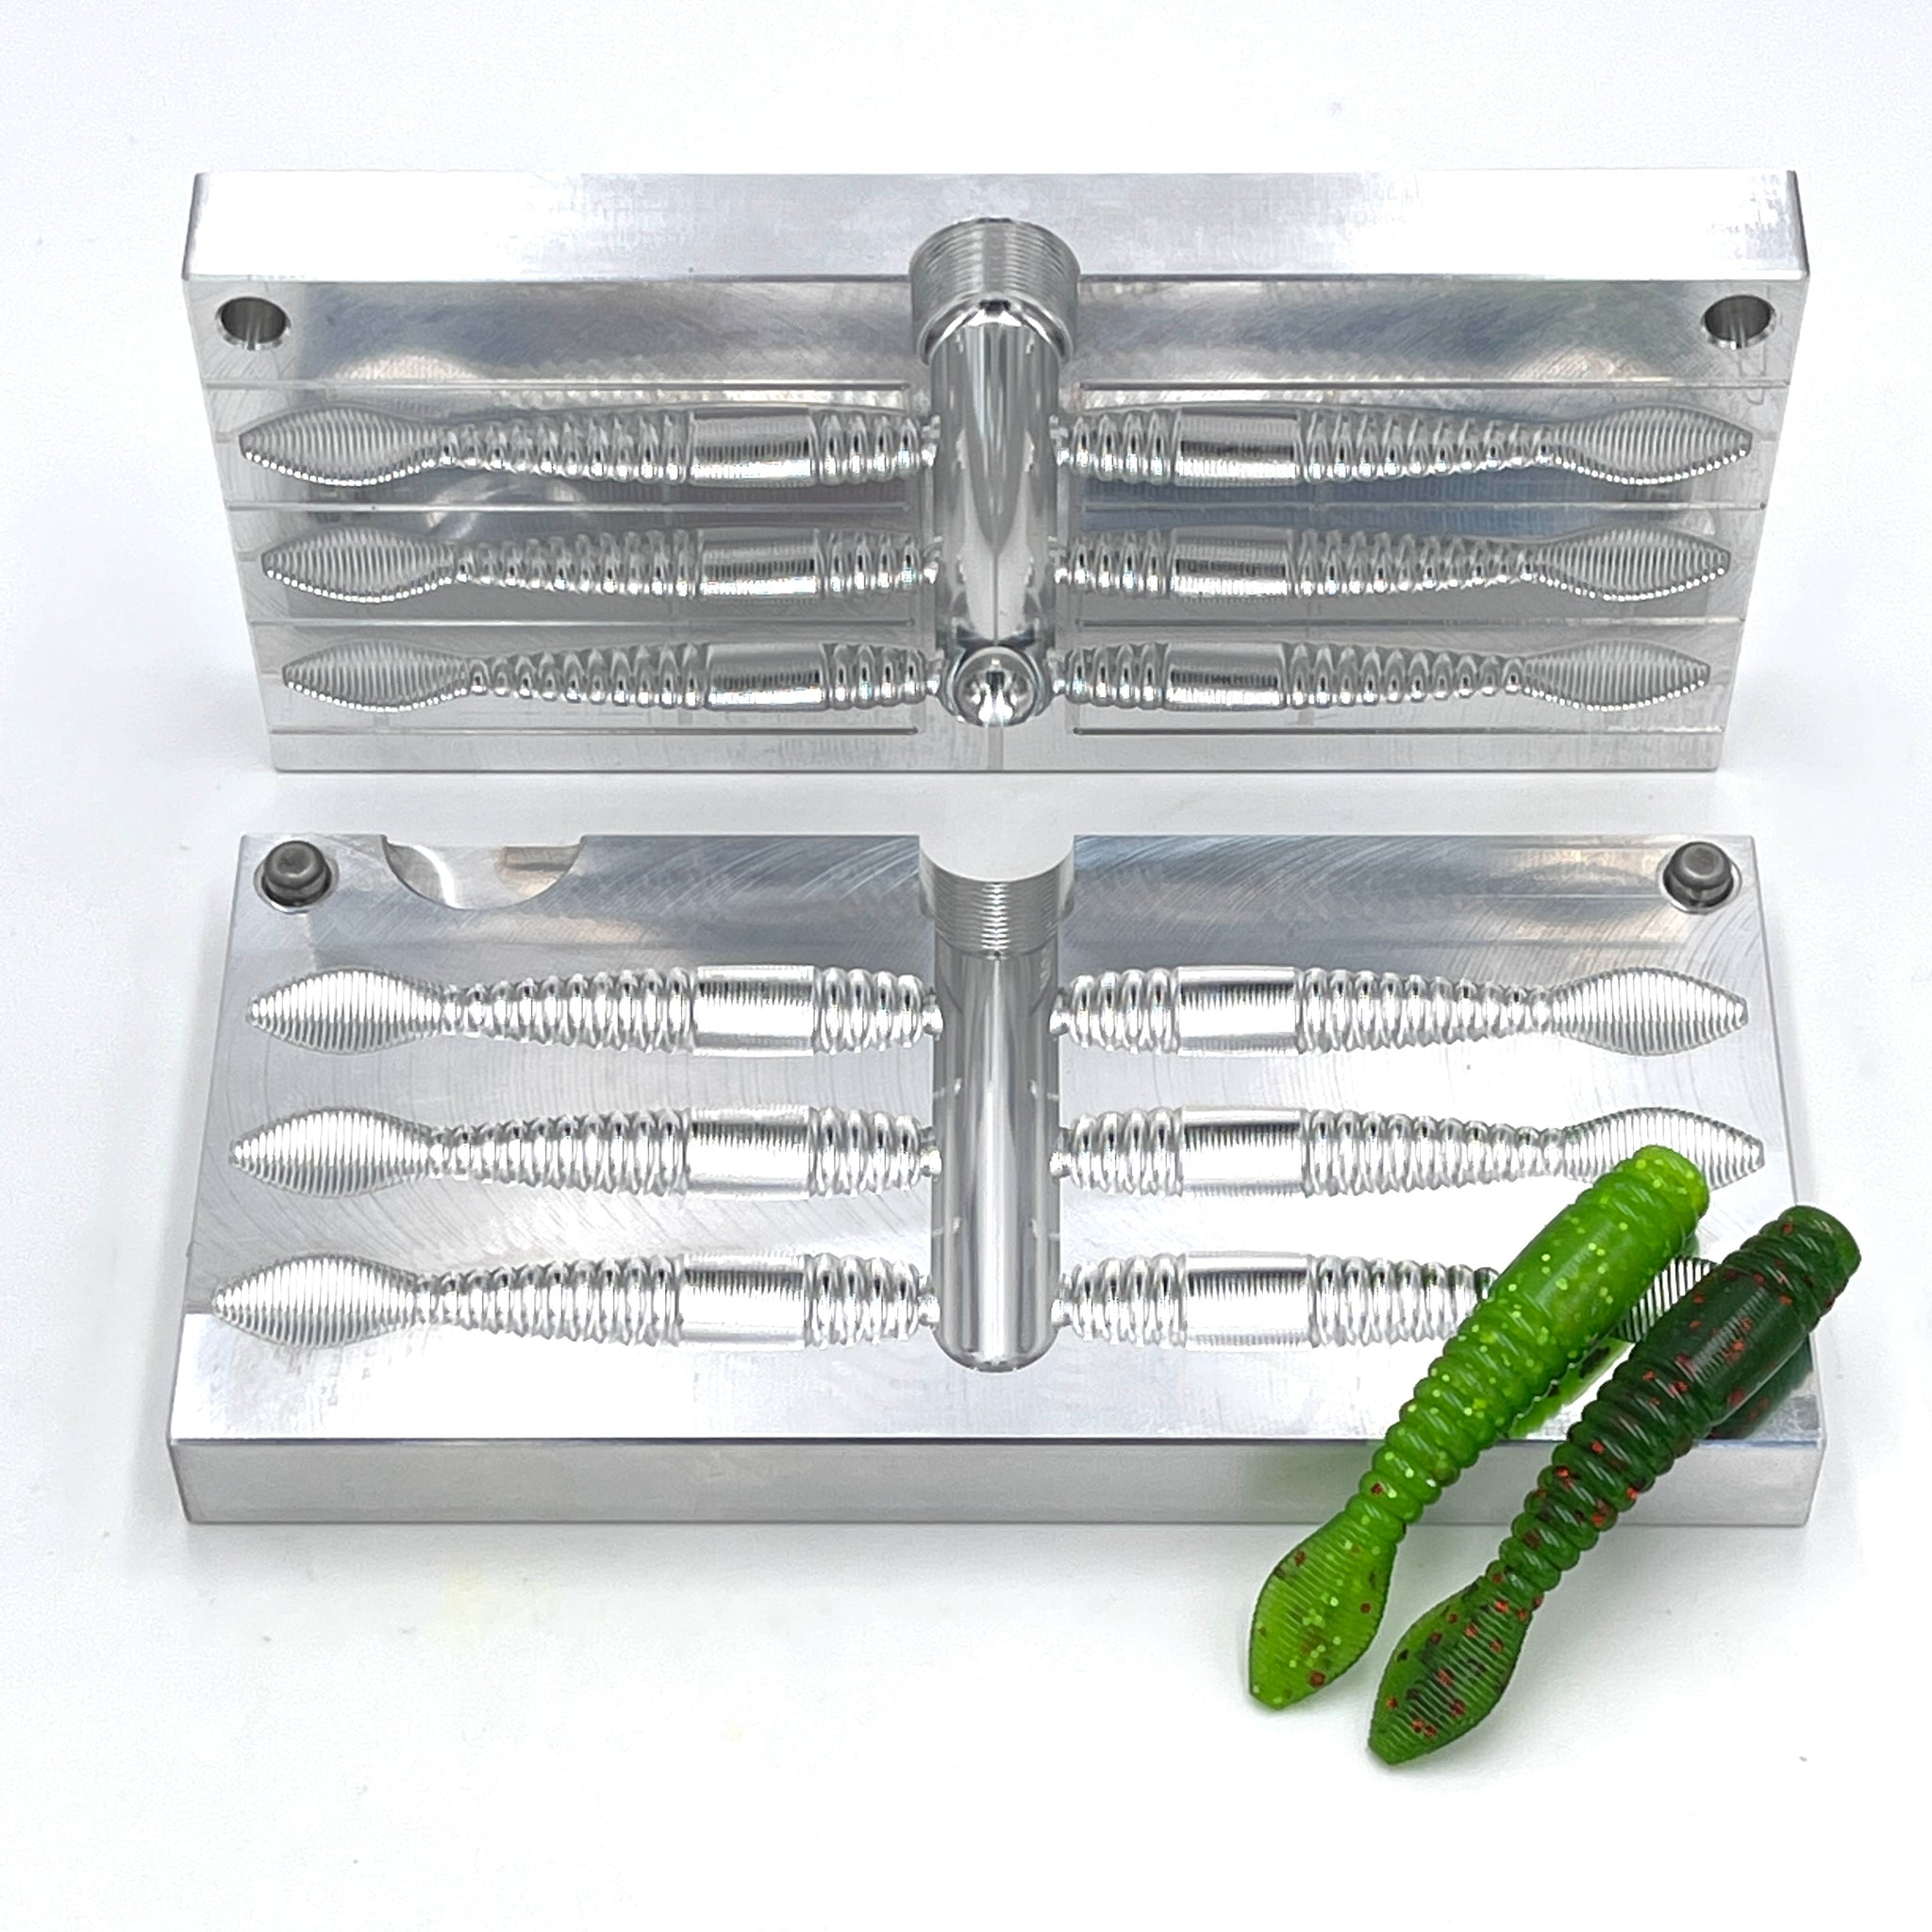 2.75 Inch Ned Crawler Hand Injection Mold – Epic Bait Molds